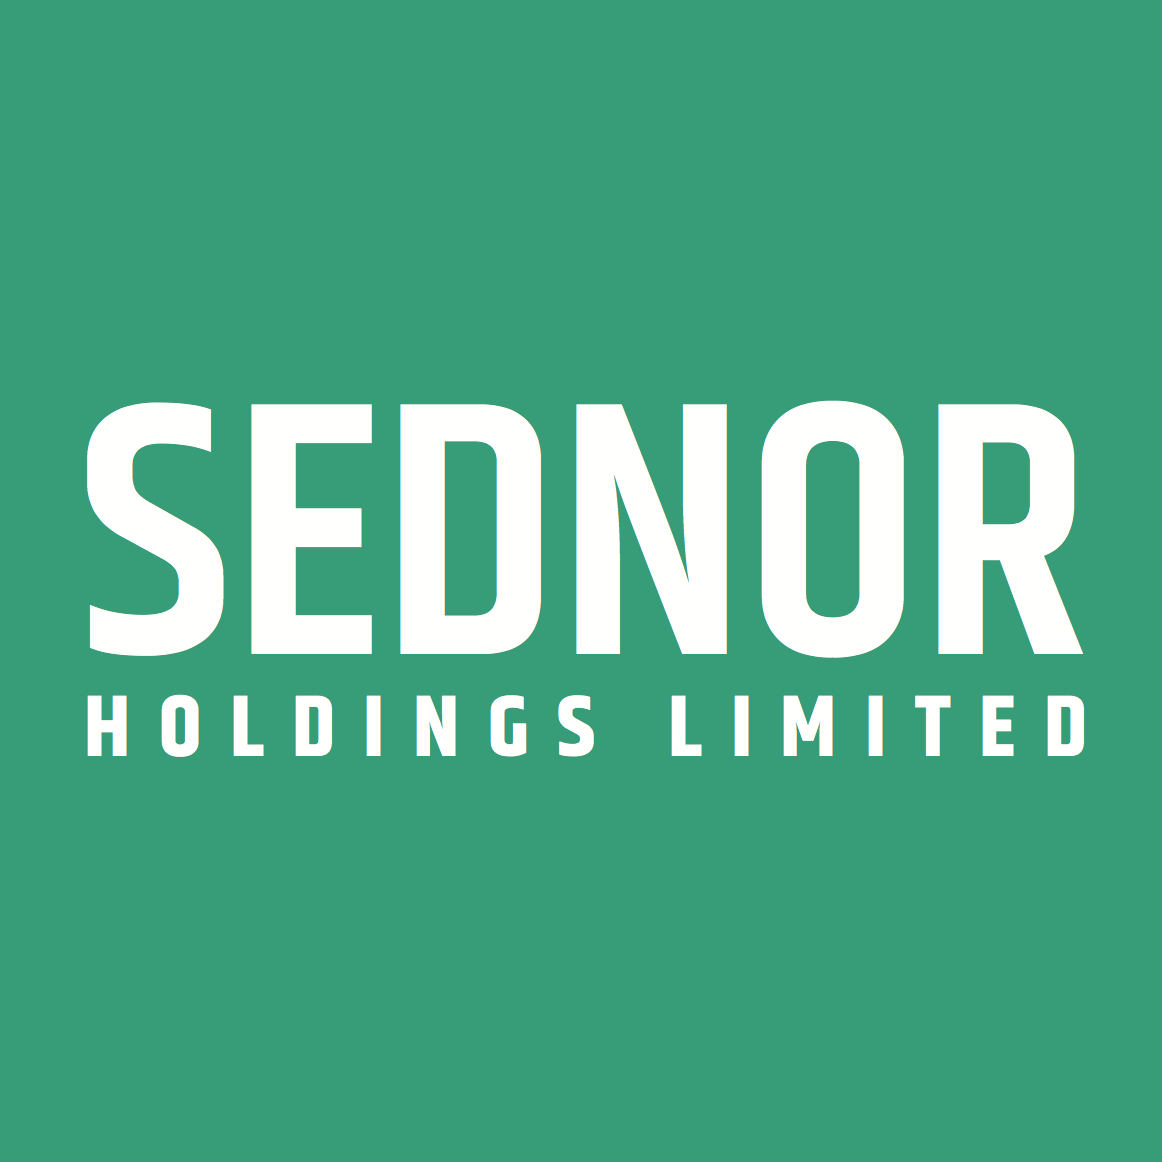 Sednor Holdings Limited